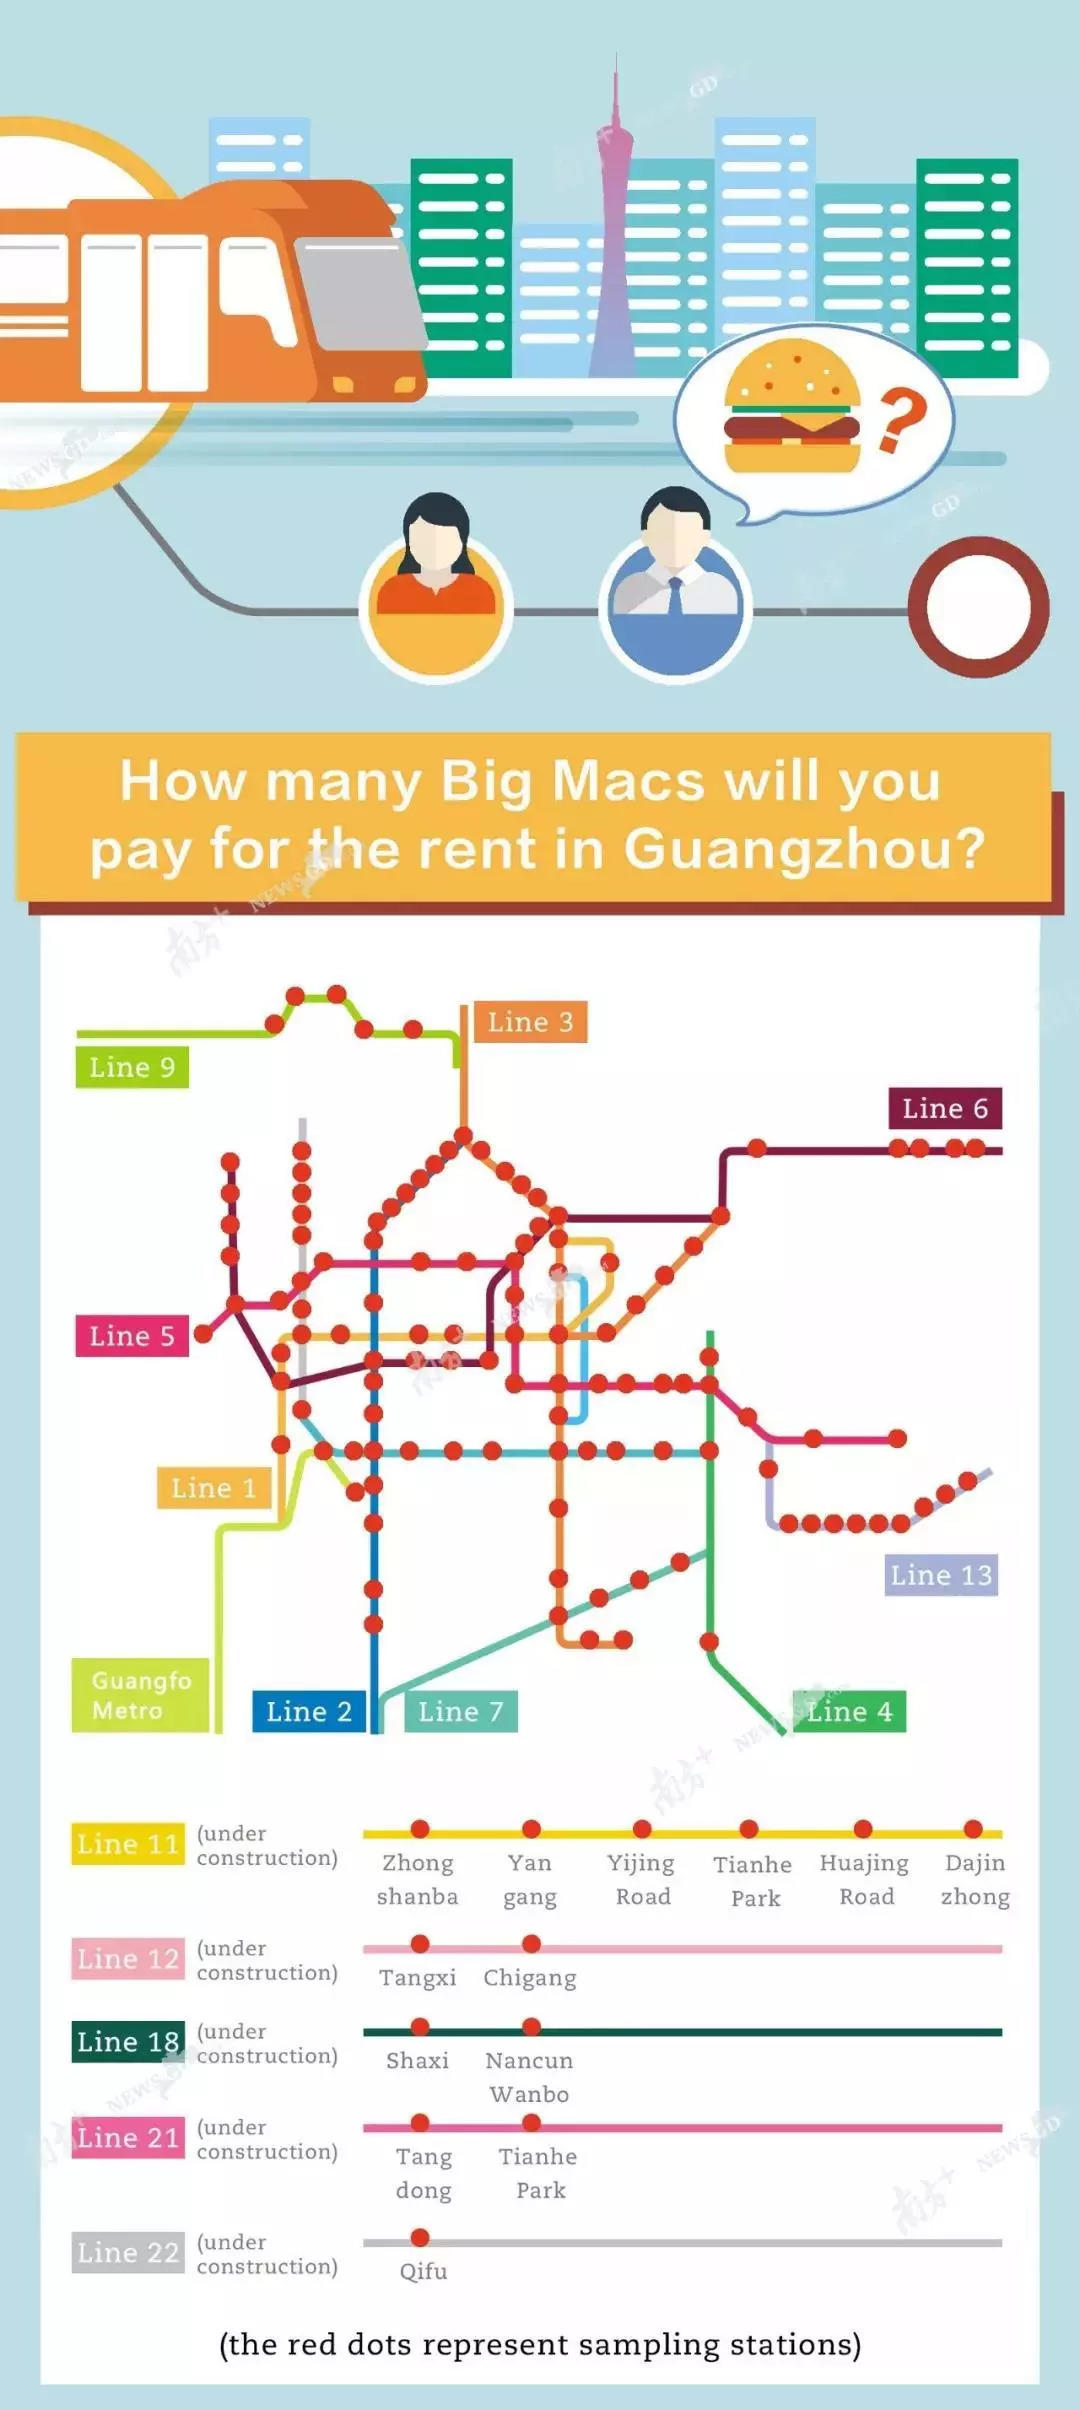 Monthly Rent In China = How Many Big Macs?